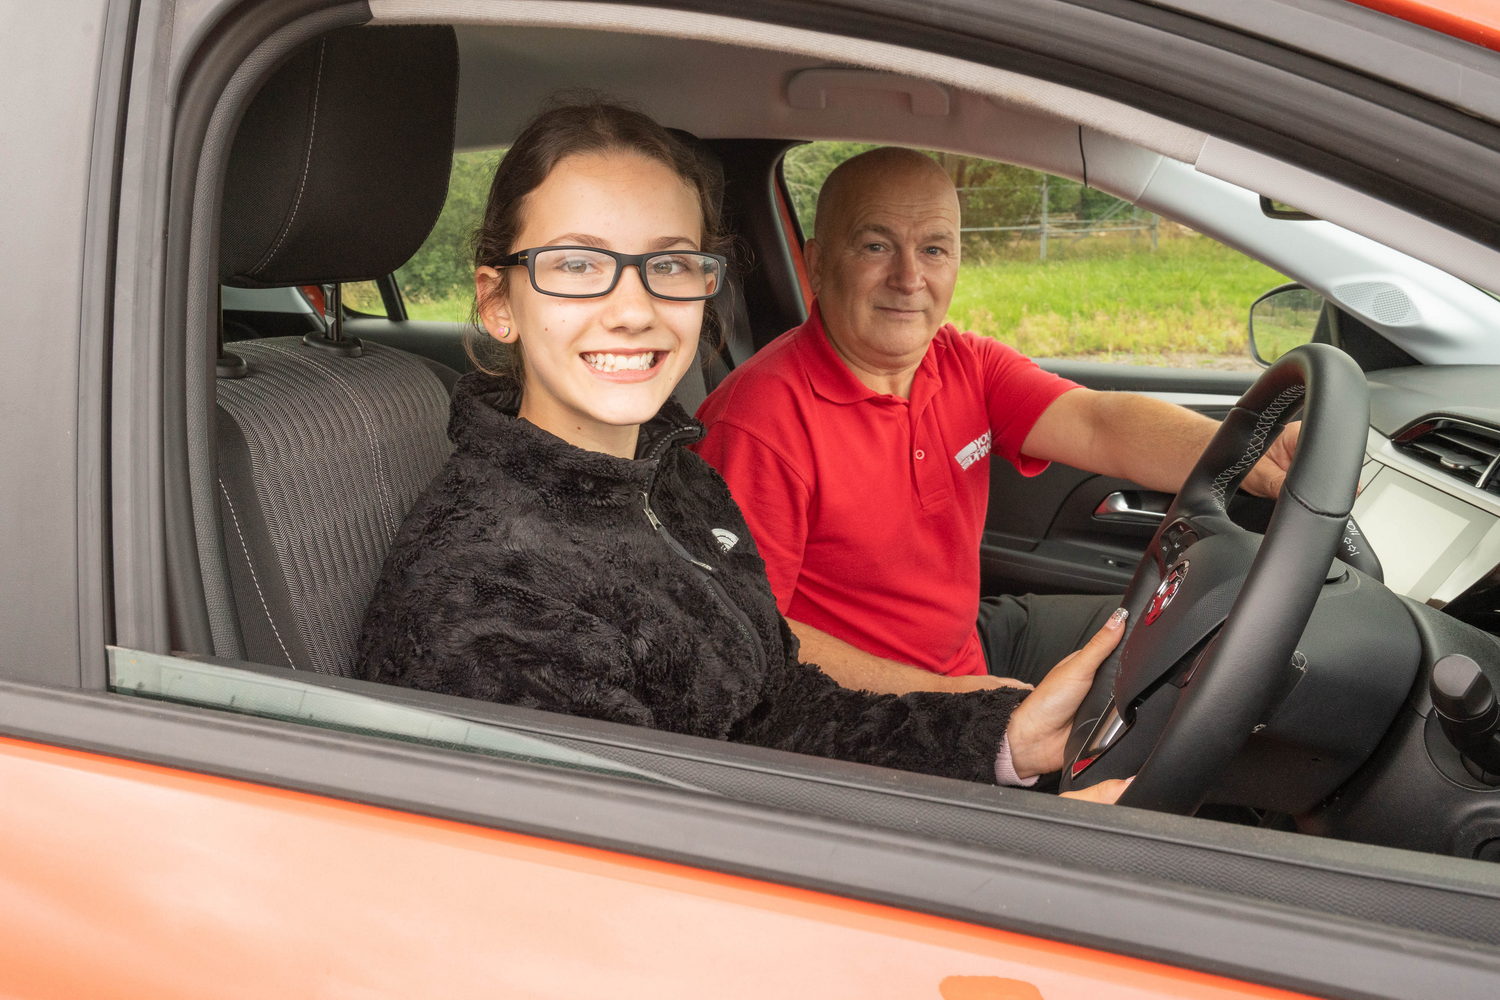 Complete Car Features | Should we start driving in Ireland at 16?